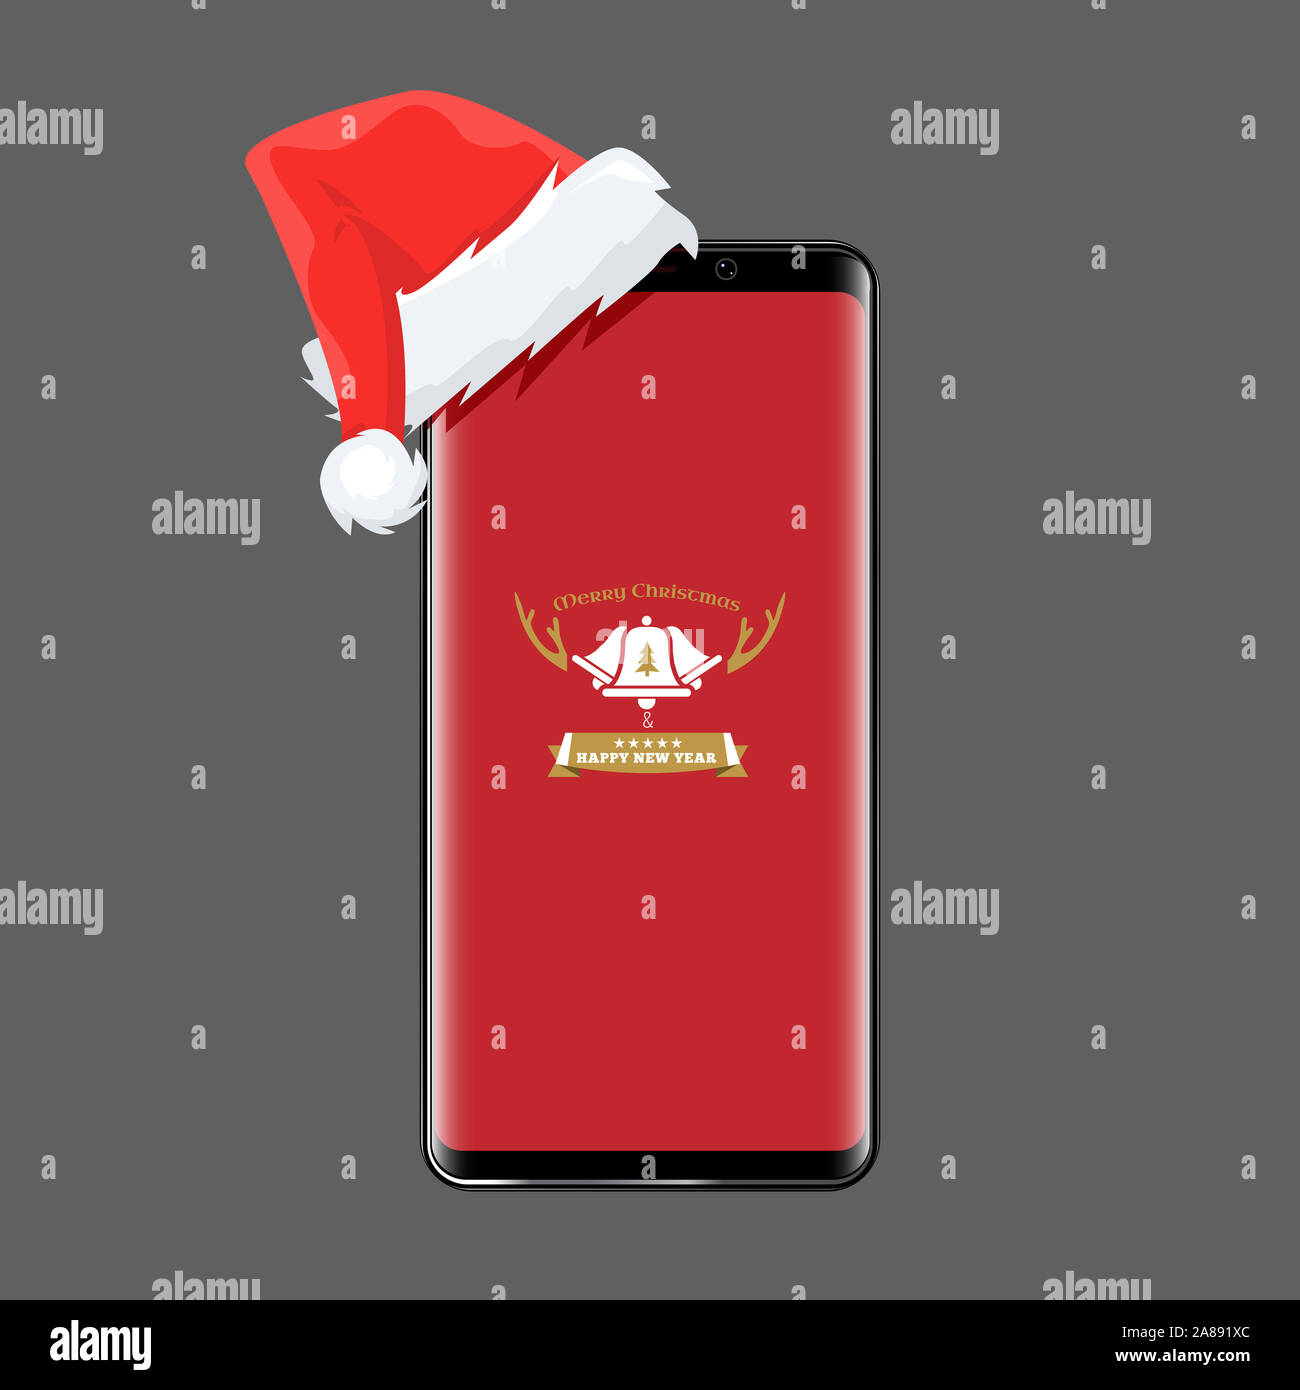 Smartphone with santa claus cap on it for christmas online shopping sale concept. Cell phone and new year design. illustration. Stock Photo